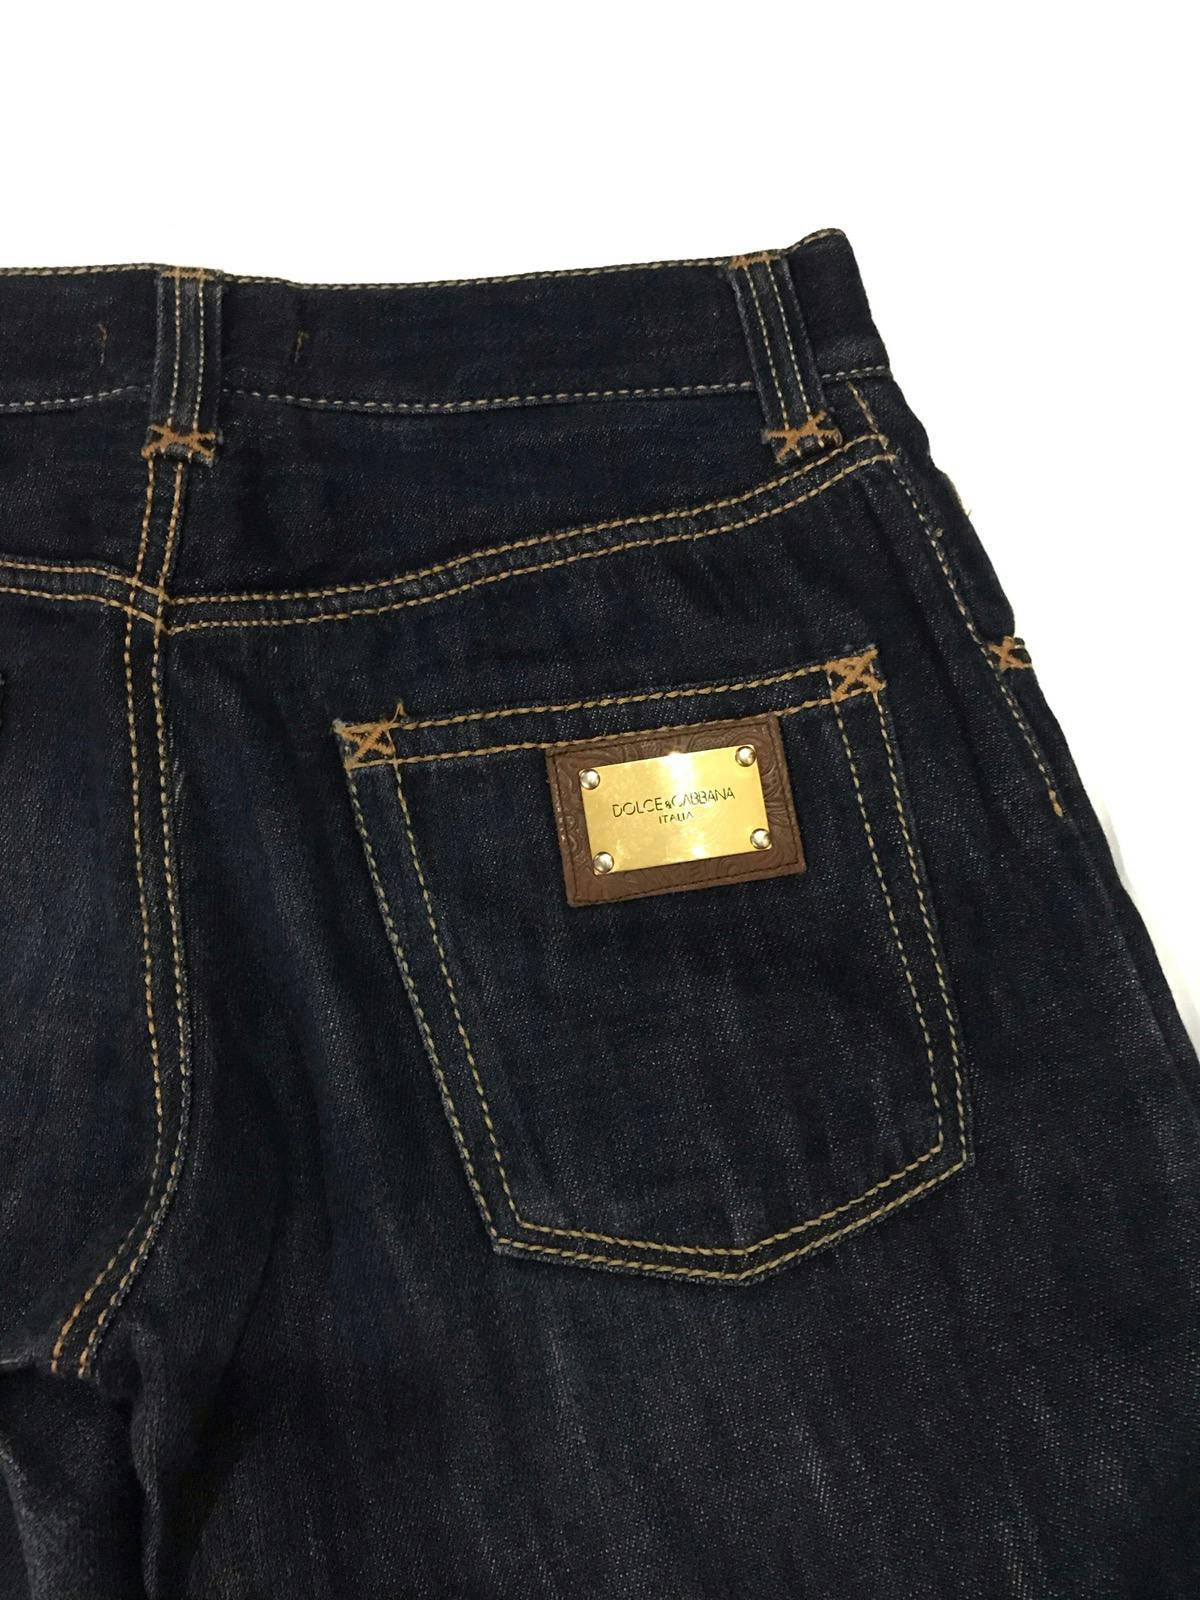 Dolce & Gabanna D&G 17 Loose Denim Jeans Made in Italy 🇮🇹 - 11